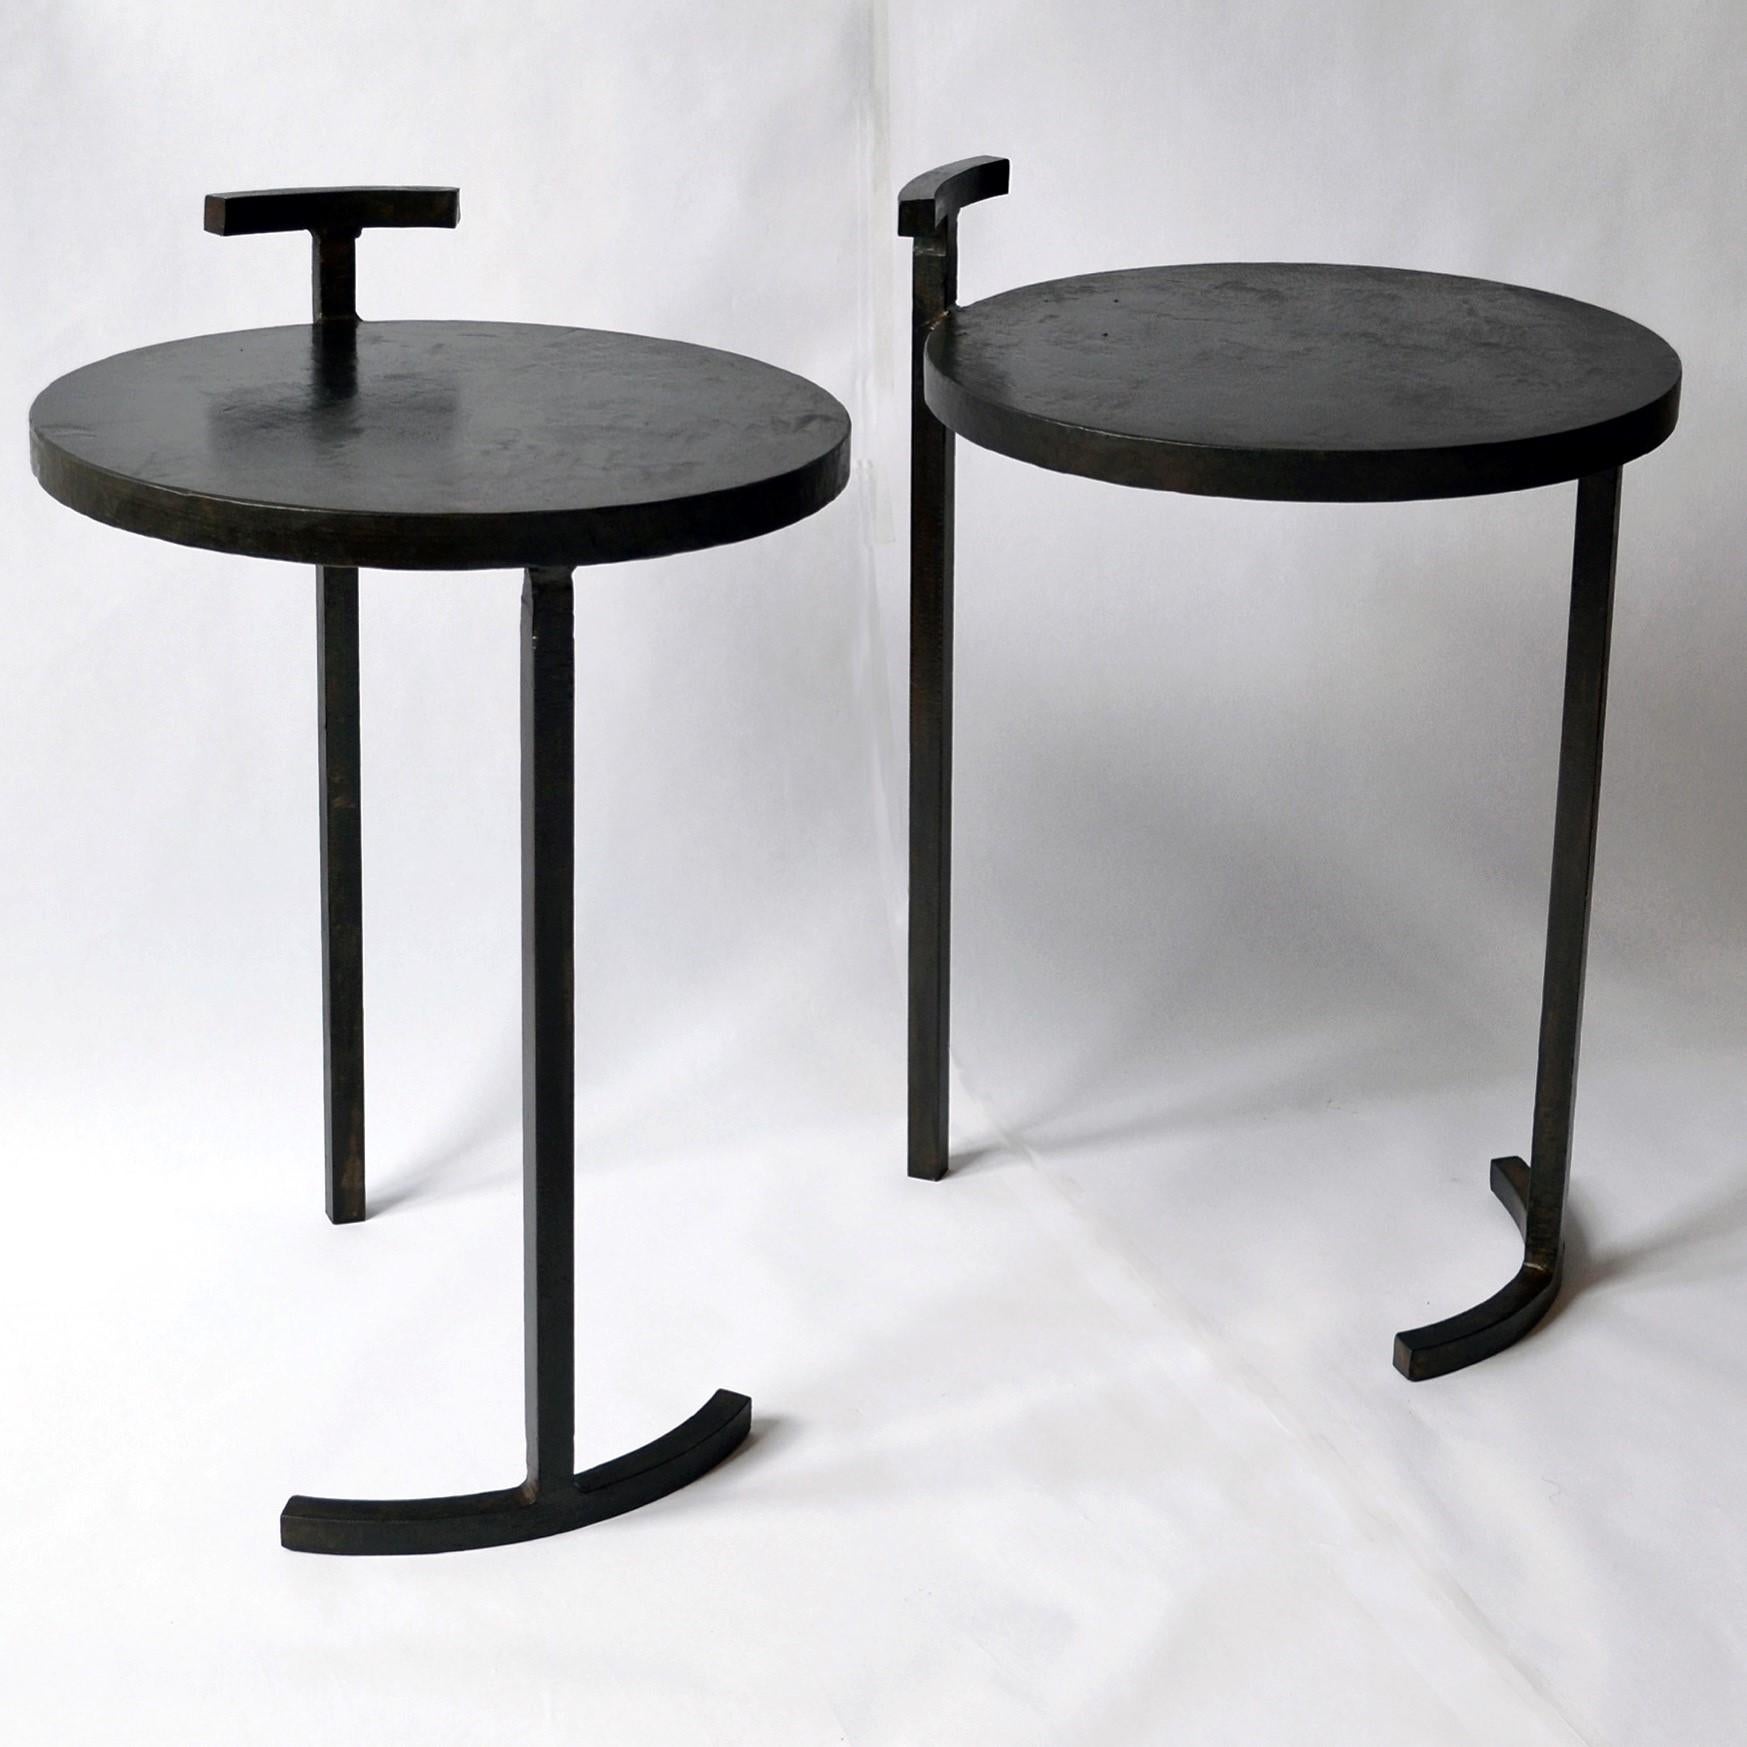 TABLE NO. 1 - PAIR 
J.M. Szymanski
d. 2017

This side table is made from cast, blackened, and waxed steel. This uniquely designed frame allows for a 1-inch thick, cast steel, circular top to balance on only two legs. This is the first table designed